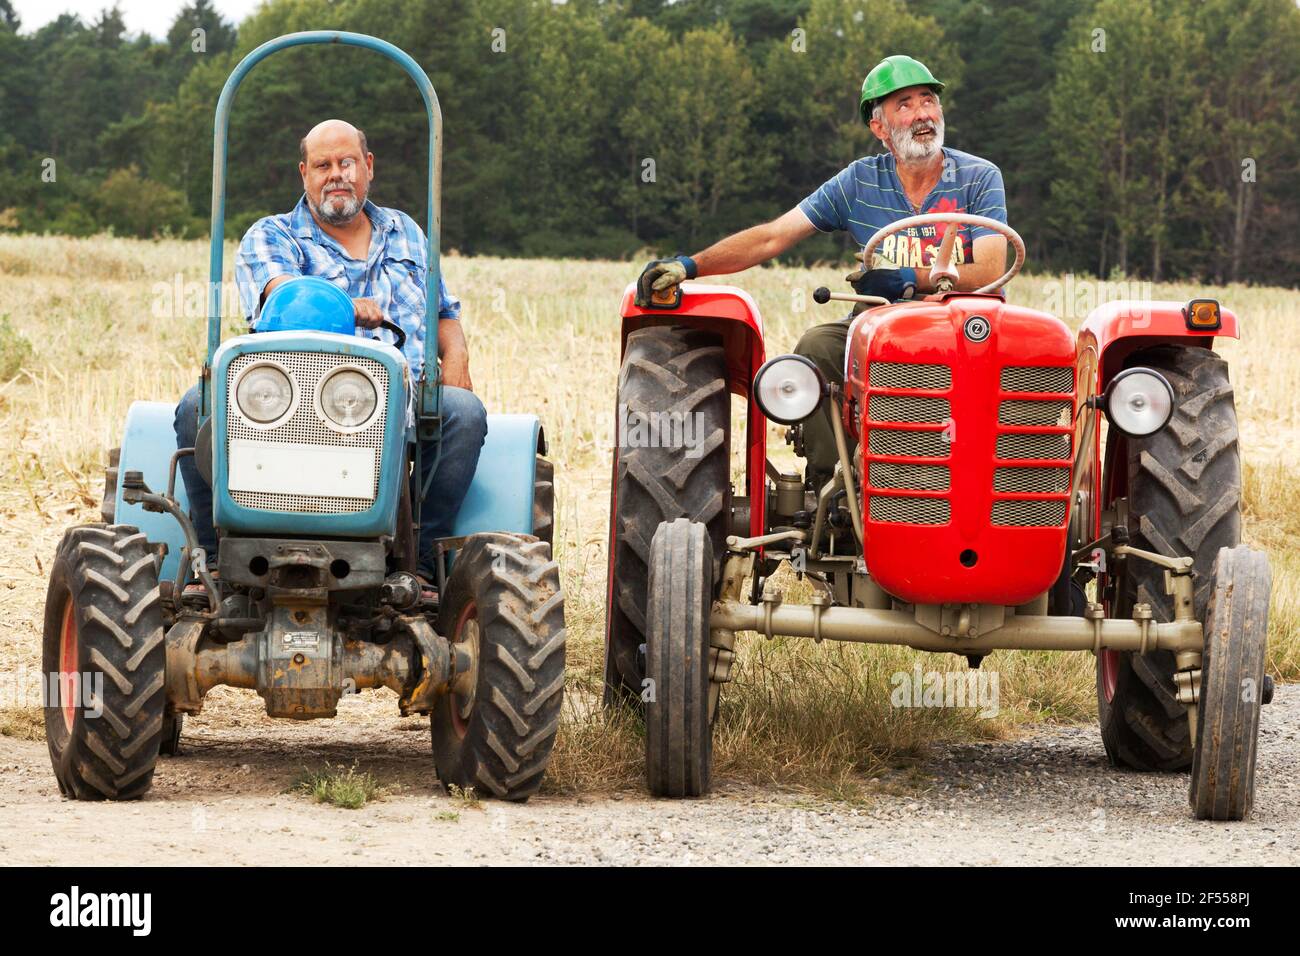 Two Czech farmers on tractors, Zetor 25 and Eicher Stock Photo